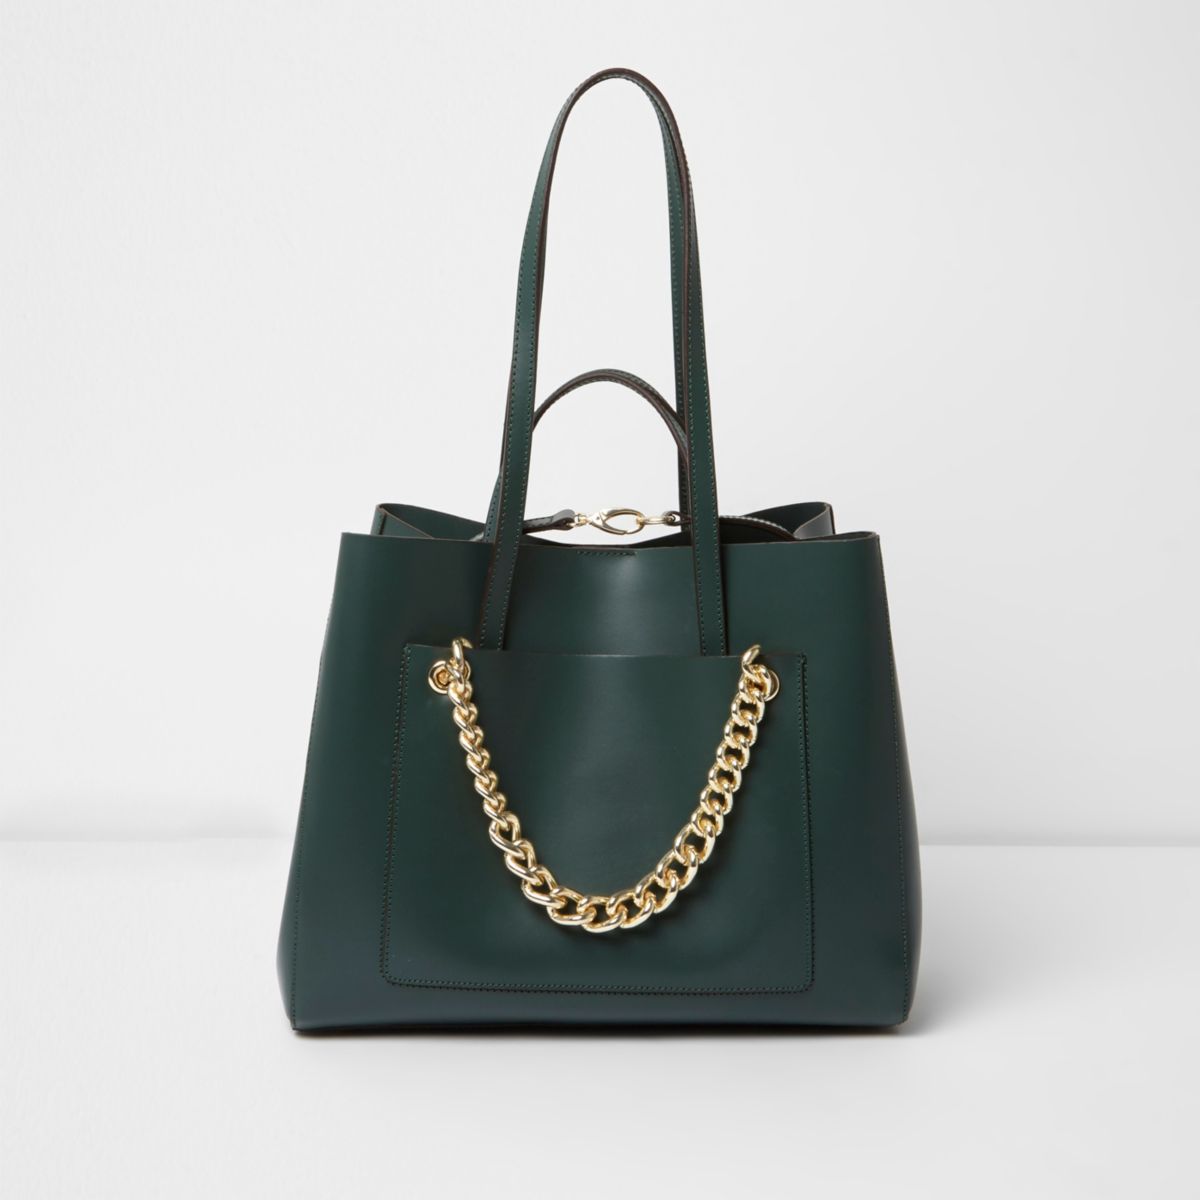 Dark green leather chain winged tote bag - Shopper & Tote Bags - Bags & Purses - women